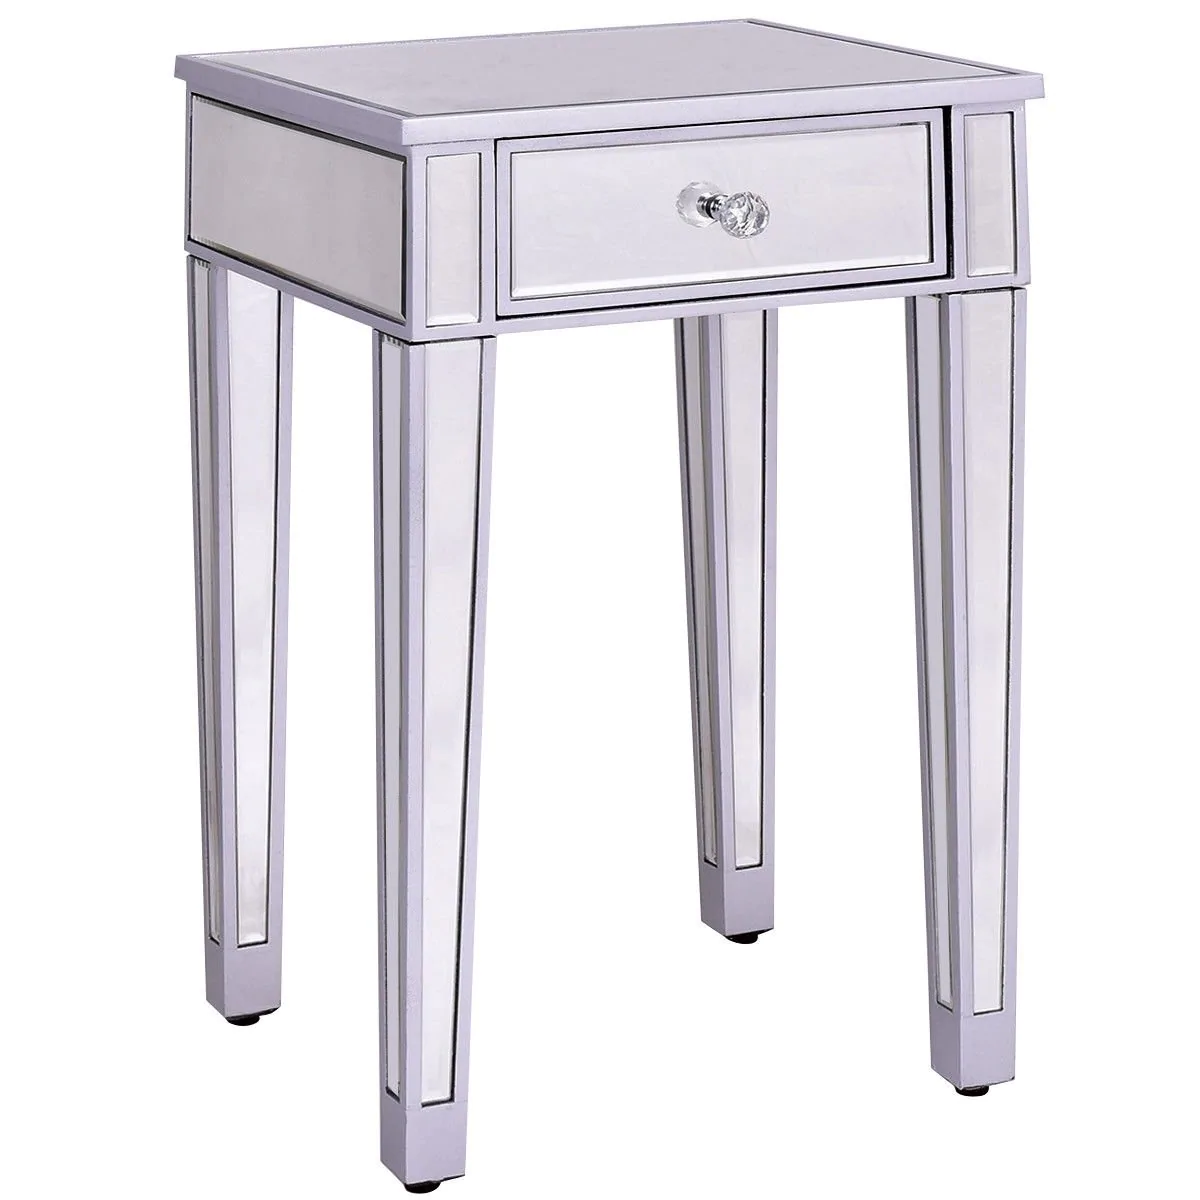 way mirrored accent table nightstand end bedside storage cabinet drawer sliver free shipping today small lights battery operated easy christmas runner patterns mid century